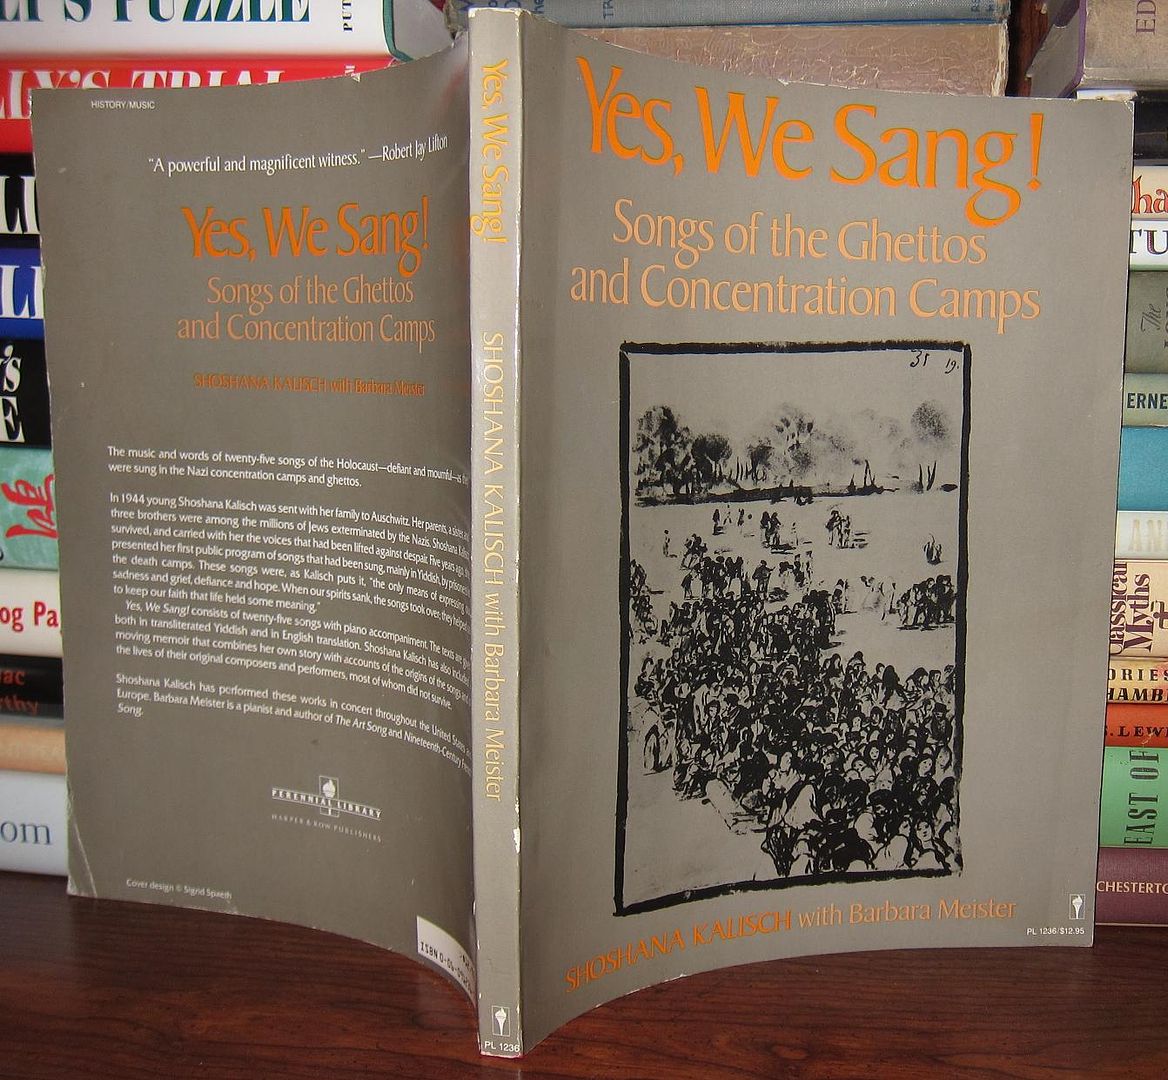 KALISCH, SLOSHANA; MEISTER, BARBARA - Yes, We Sang! Songs of the Ghettos and Concentration Camps